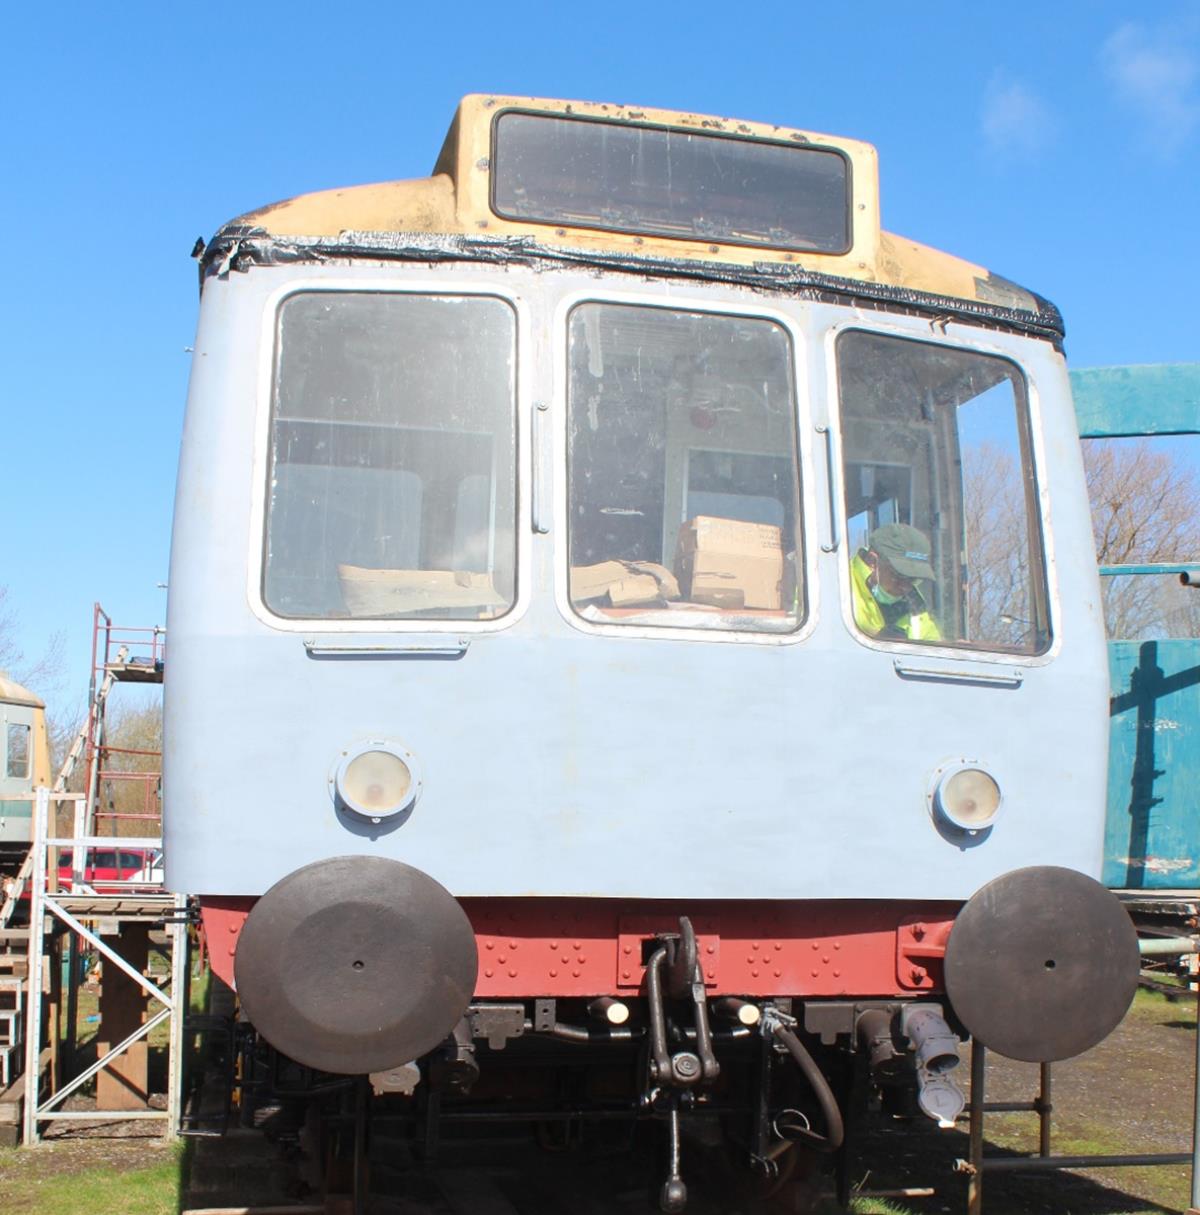 M56484 has had old paint removed from the steelwork and a primer applied.